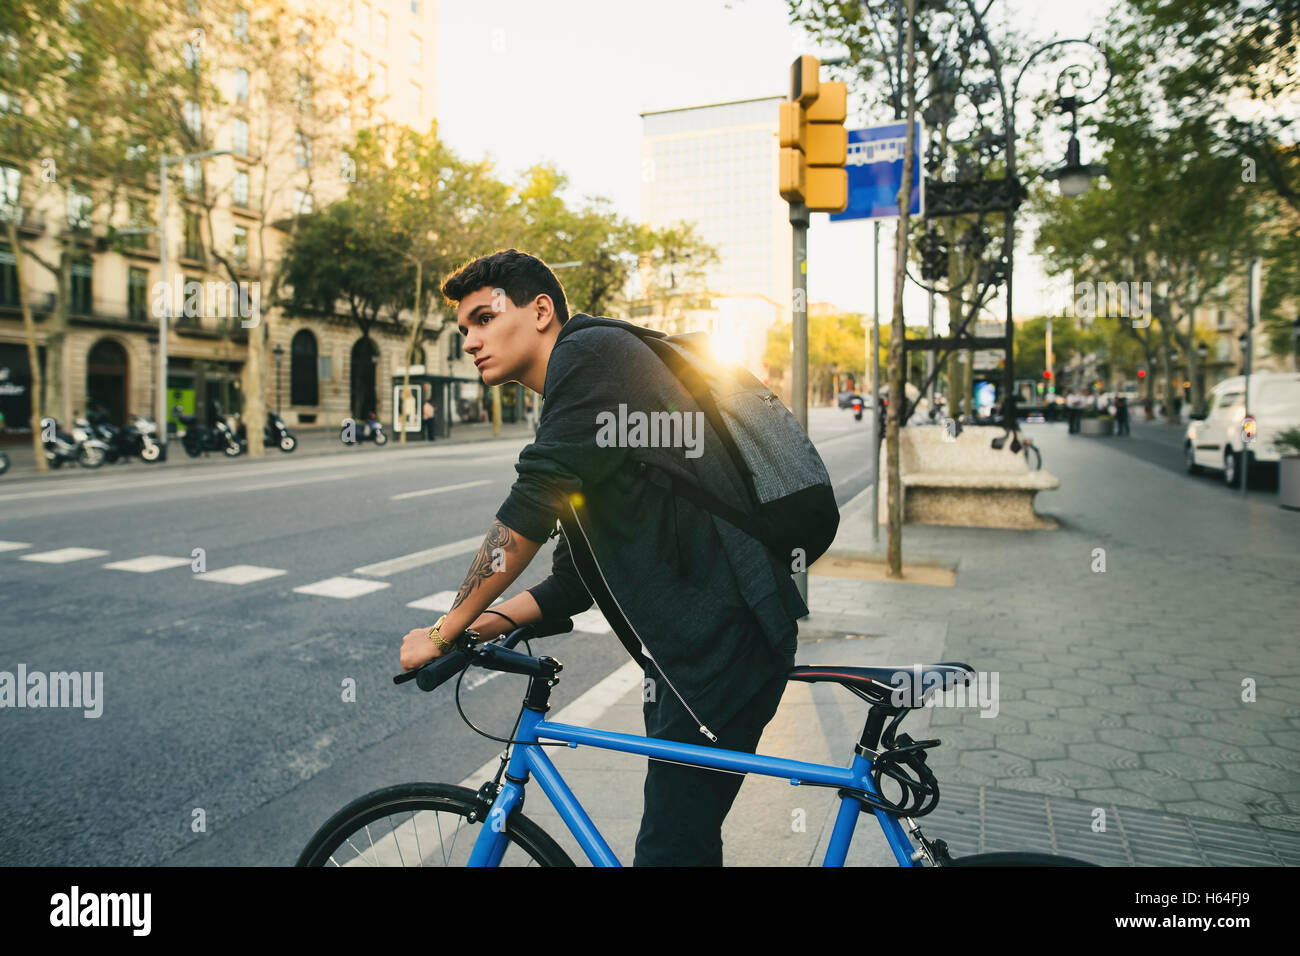 Teenager with a bike in the city Stock Photo